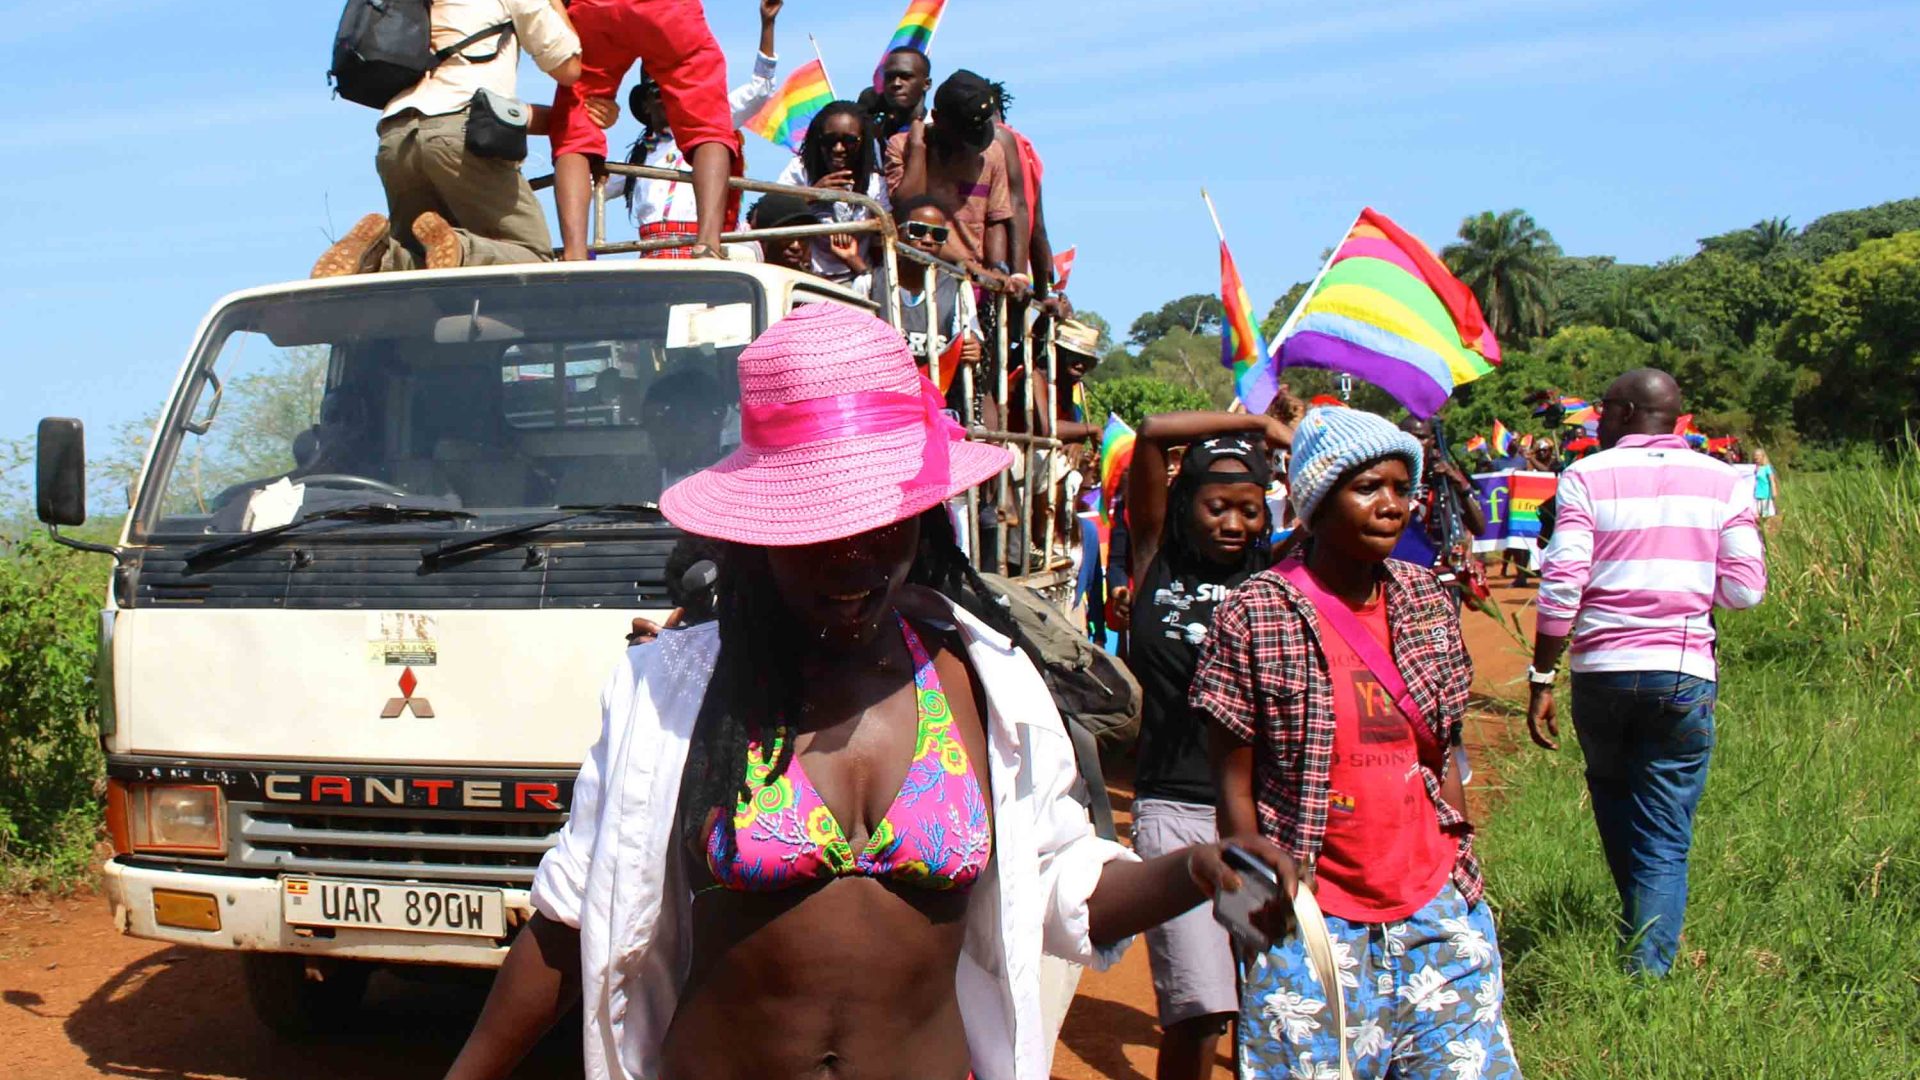 Should Uganda’s anti-homosexuality laws really be the “death knell” for the country’s tourism?